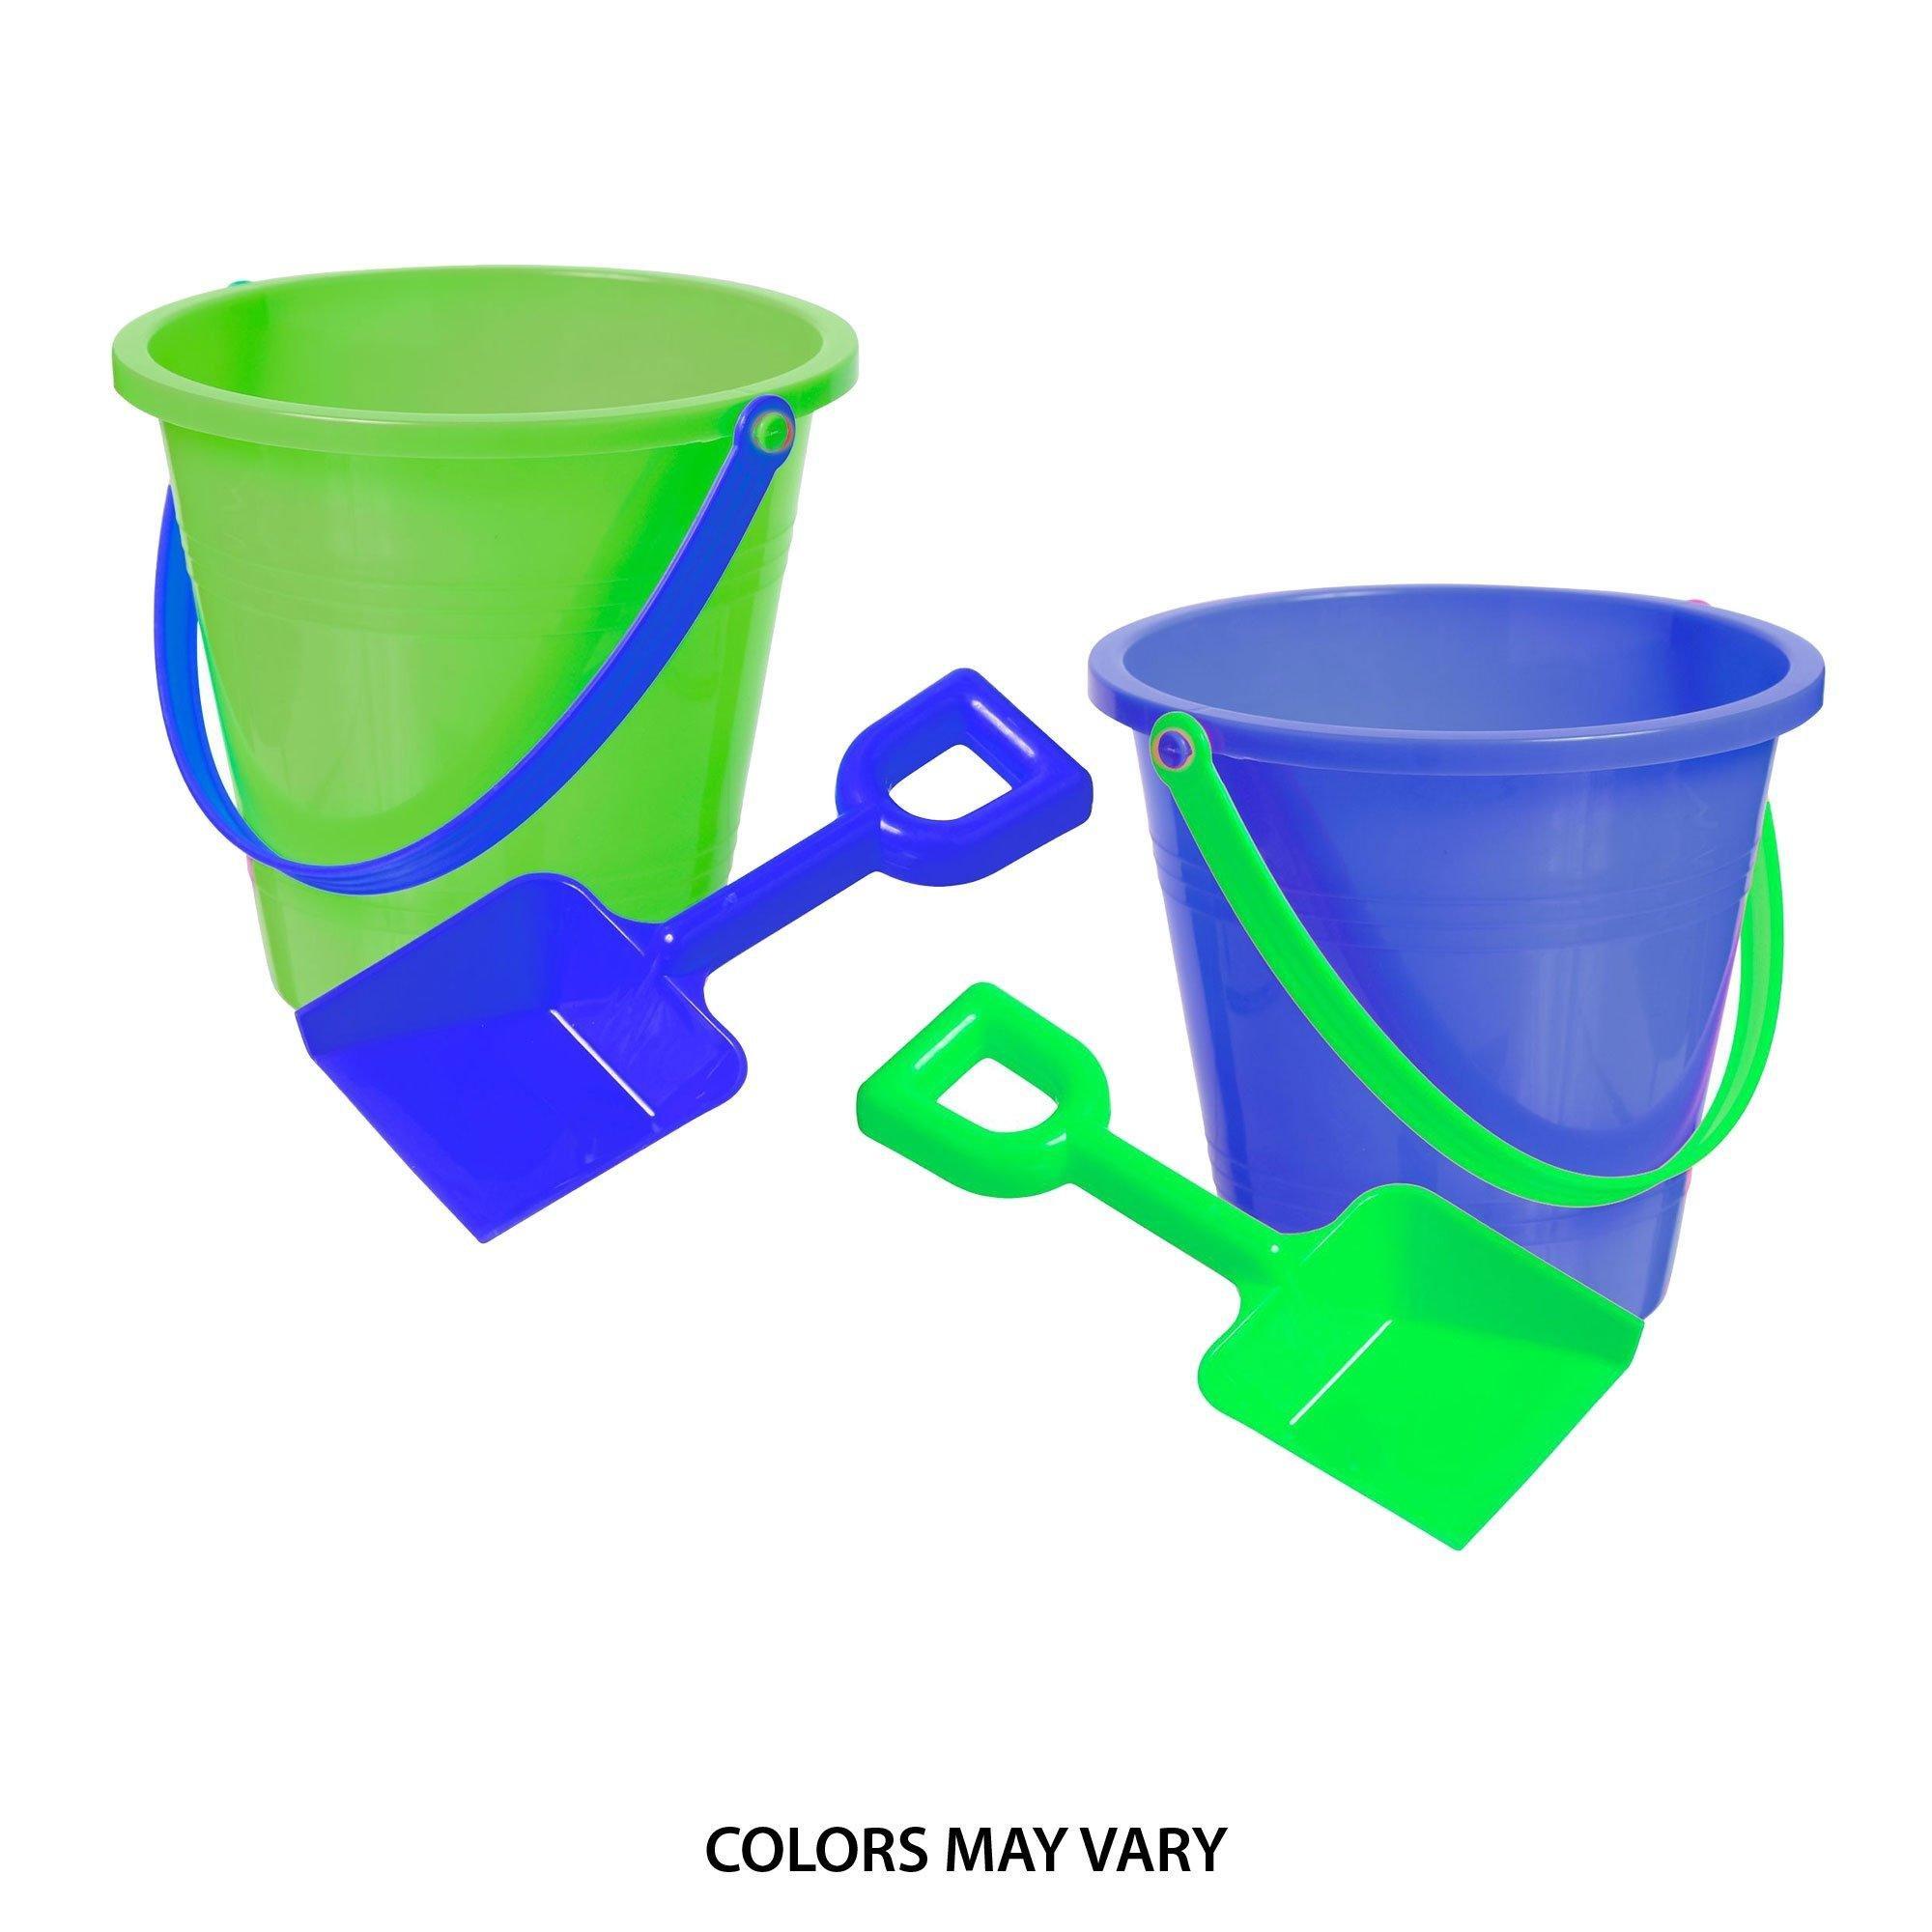 four colorful plastic buckets with handles on a dark background